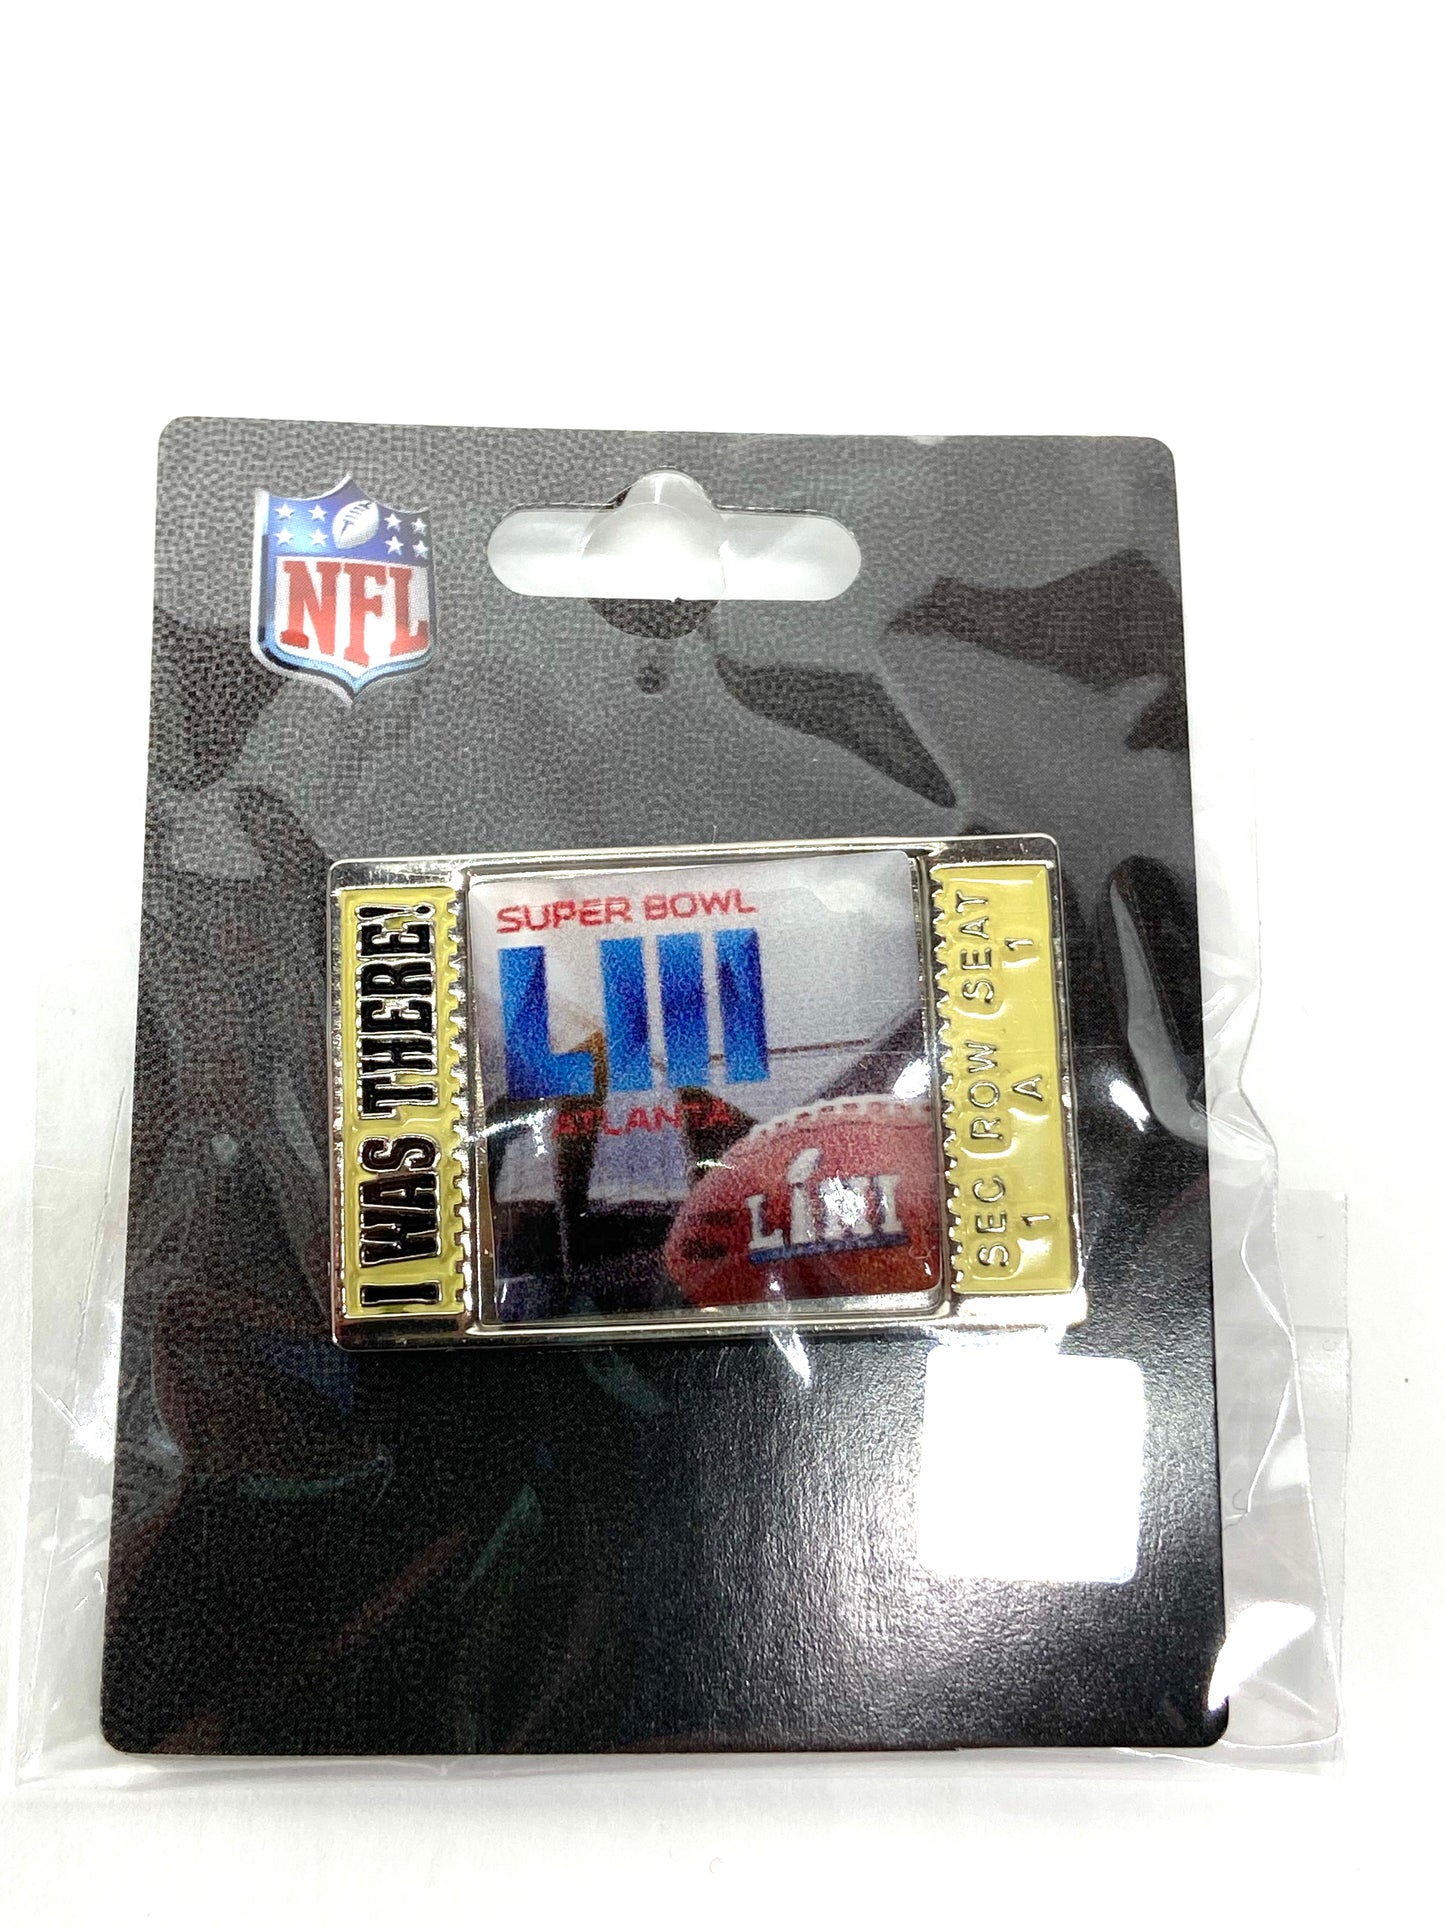 Super Bowl NFL Collectible Trading Pins by Aminco International